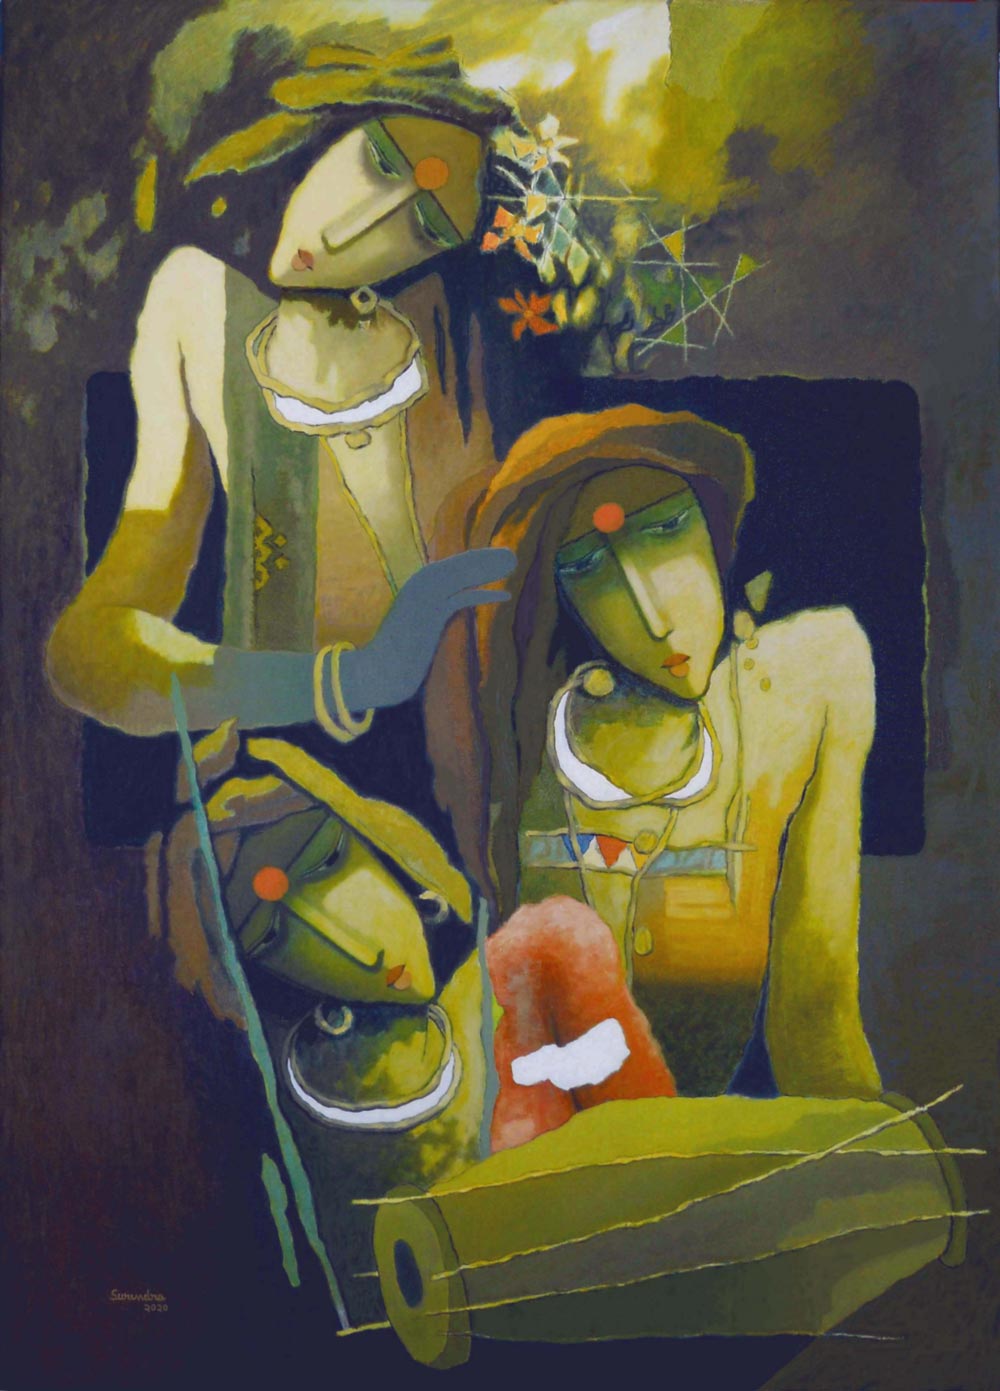 Figurative Painting with Oil on Canvas "Untitled-6" art by Surendra Pal Singh